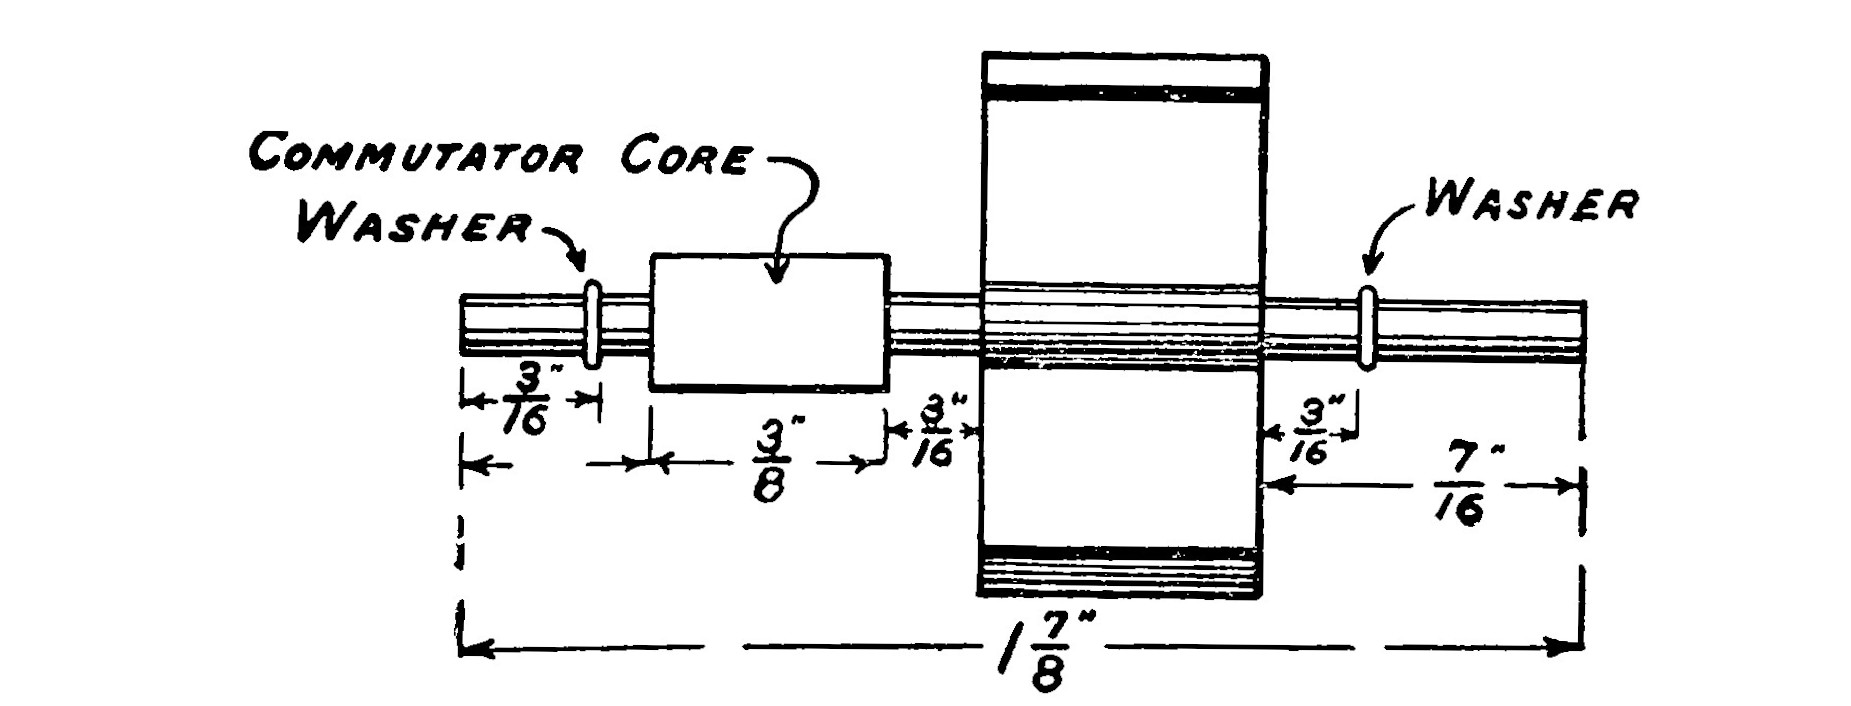 FIG. 13.—Side view of the Armature and Commutator Core assembled on the Shaft before winding.